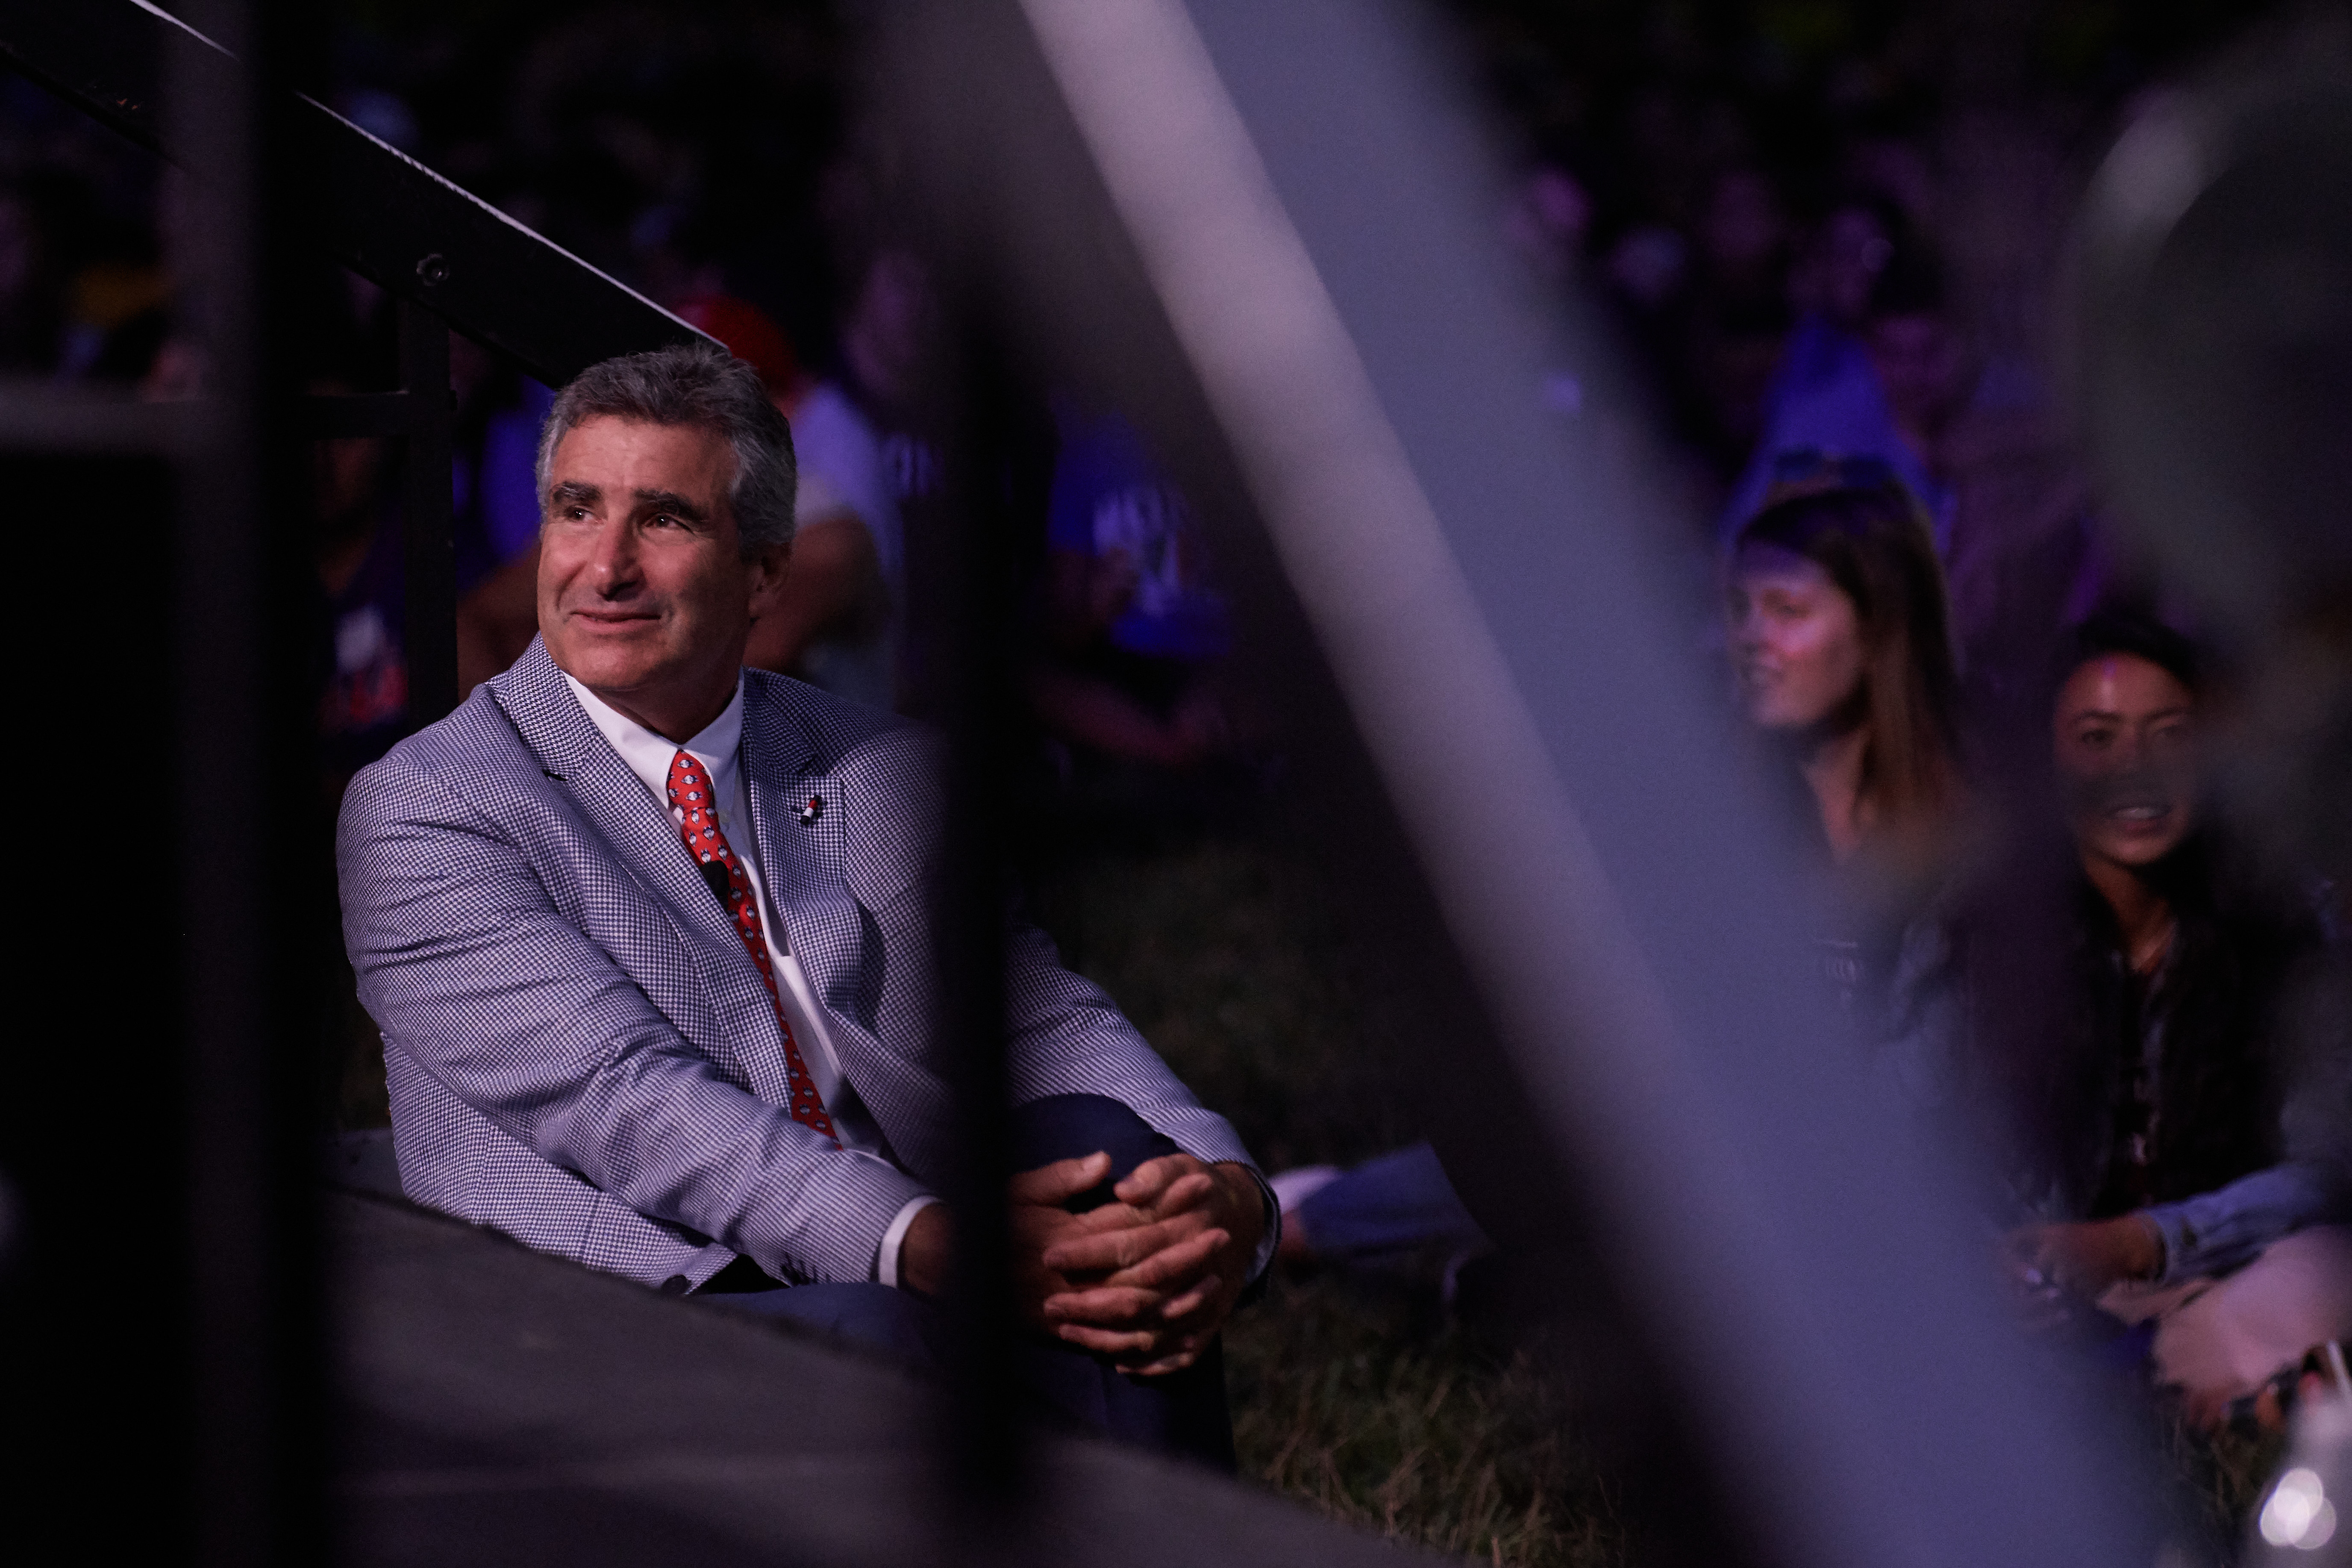 President Tom Katsouleas listens to a speaker while sitting along the stage at the the Convocation ceremony on the Student Union Mall on Aug. 23. (Peter Morenus/UConn Photo)